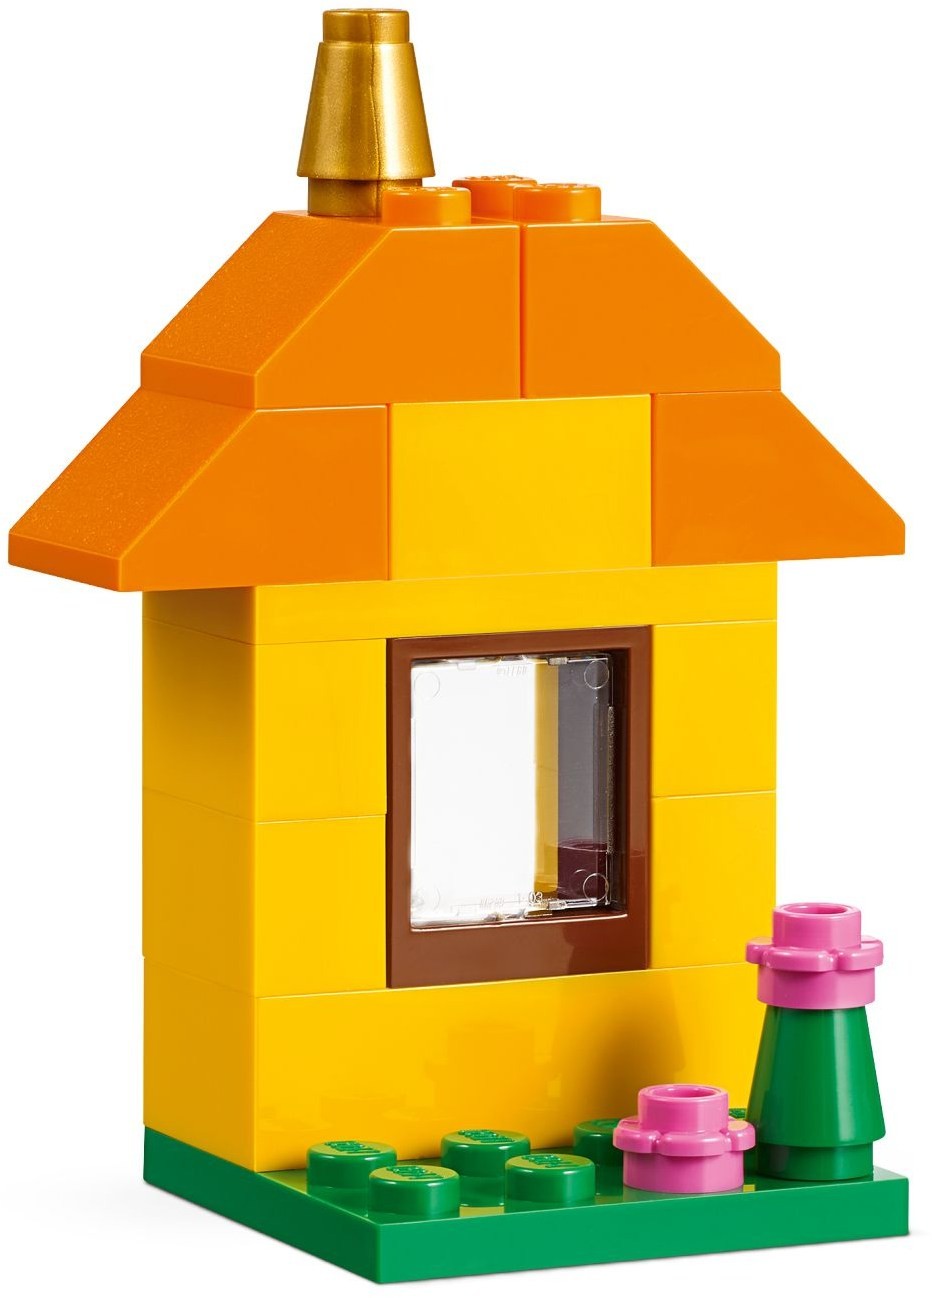 Lego Classic Bricks and Ideas for sale online 11001